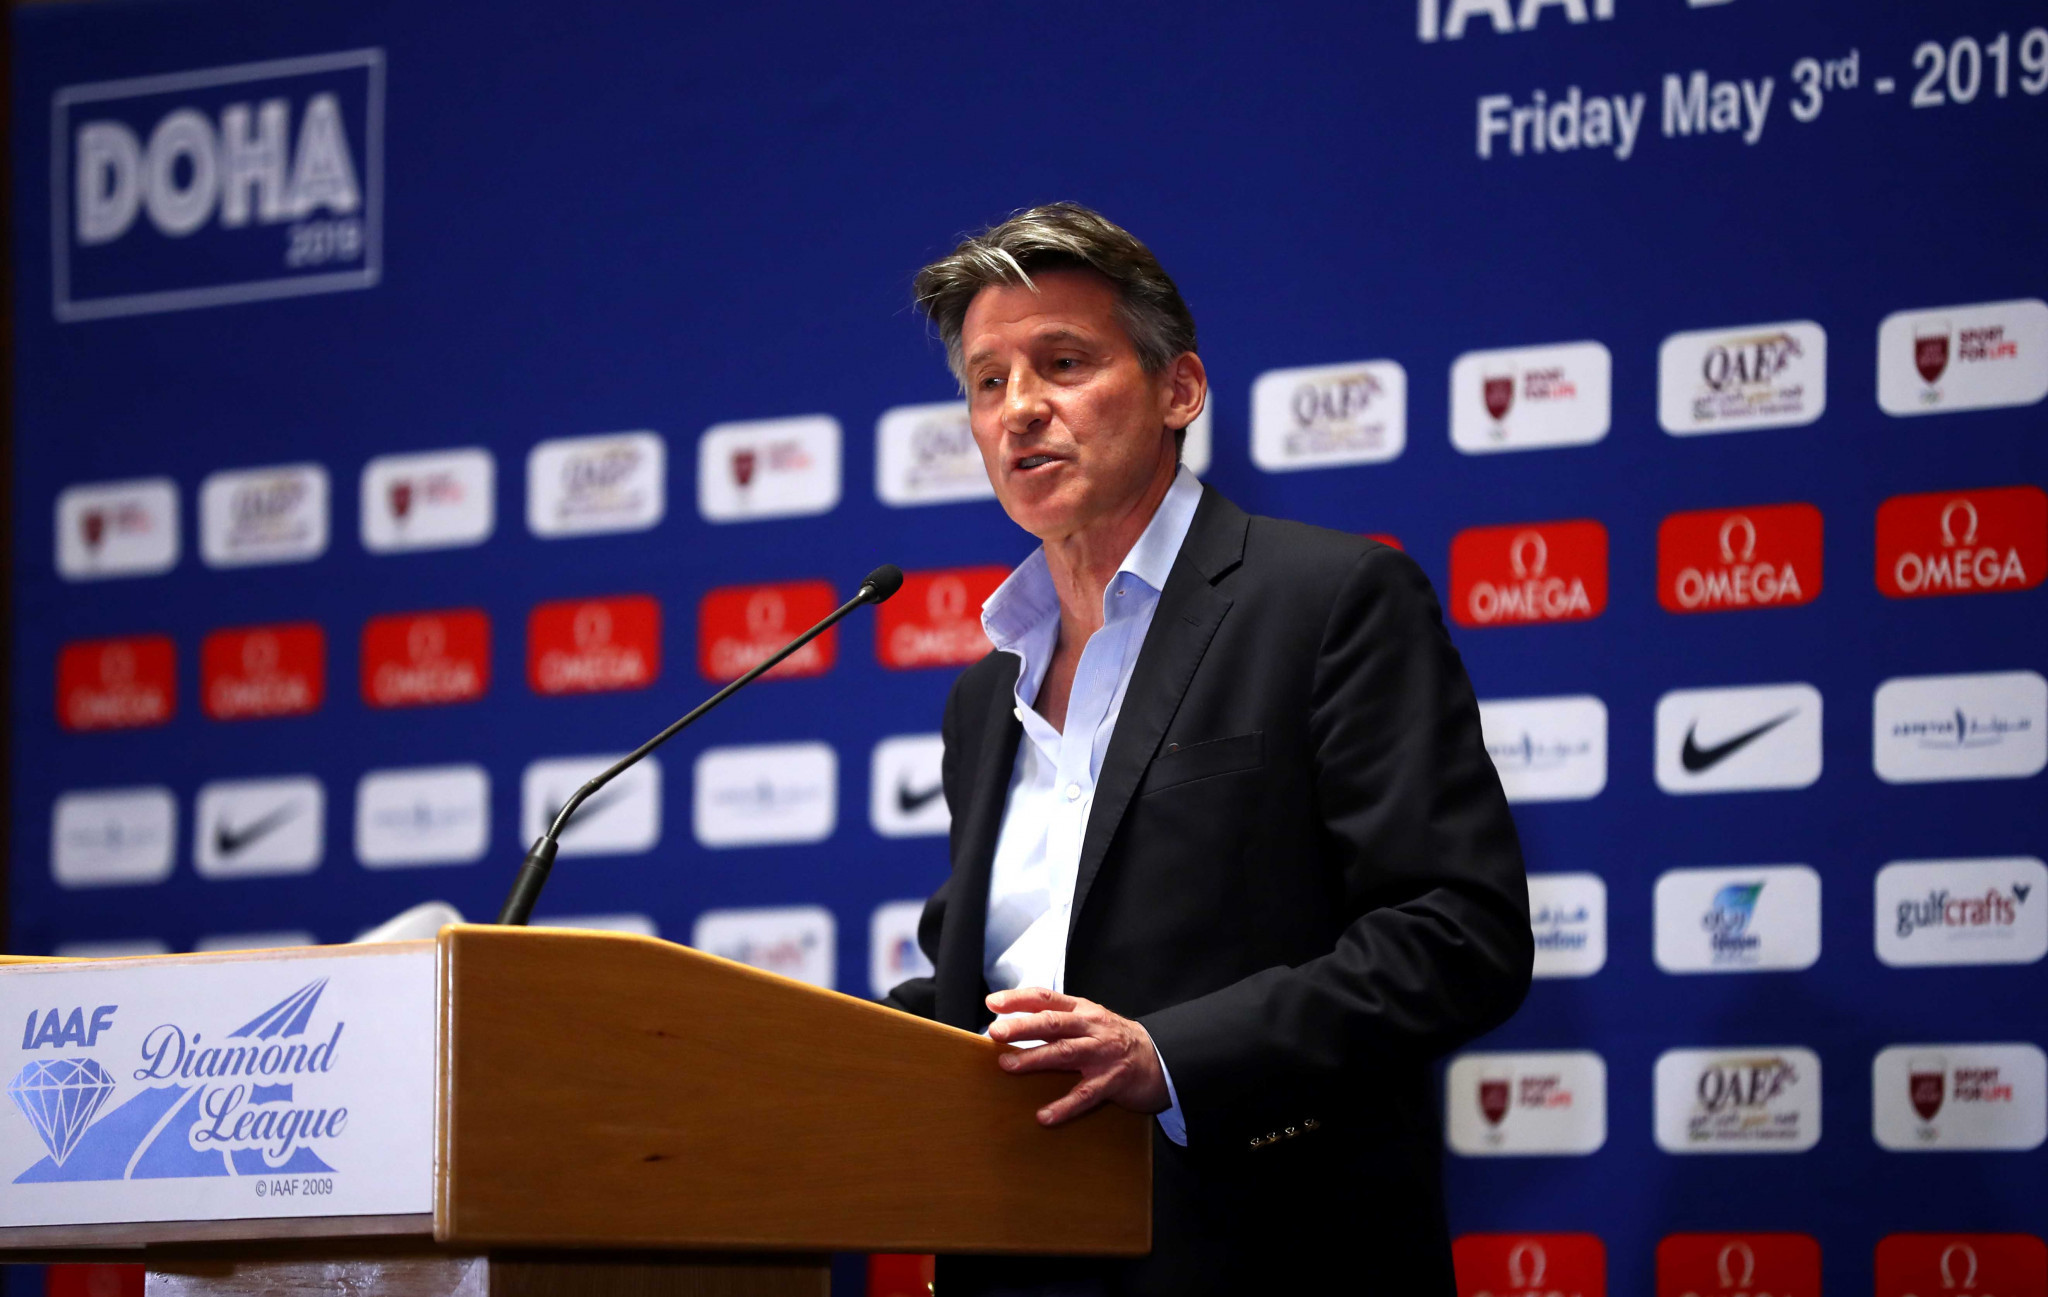 International Association of Athletics Federations President Sebastian Coe has led the campaign to have the new rules, which many claim discriminate against Caster Semenya, implemented ©Getty Images